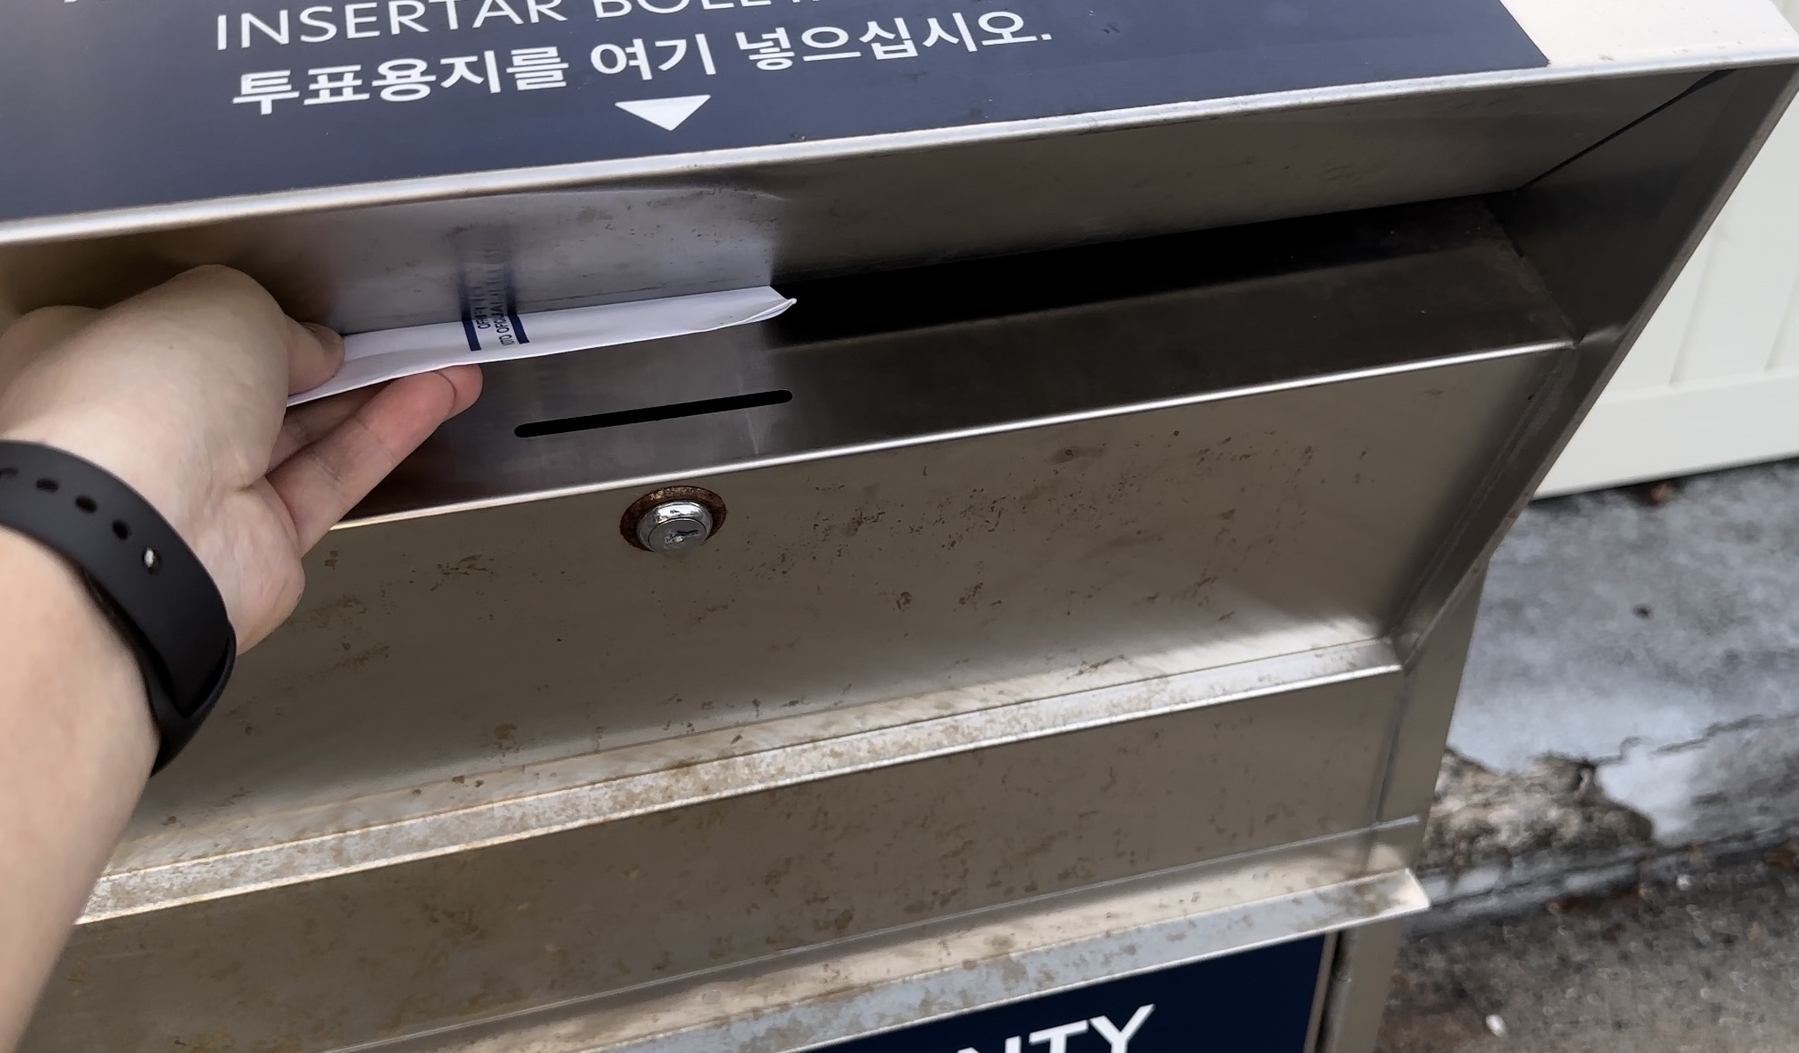 A man wearing a watch on his left arm is inserting an envelope into a shiny silver metal election drop box outdoors.  The envelope is most of the way in the slot. 